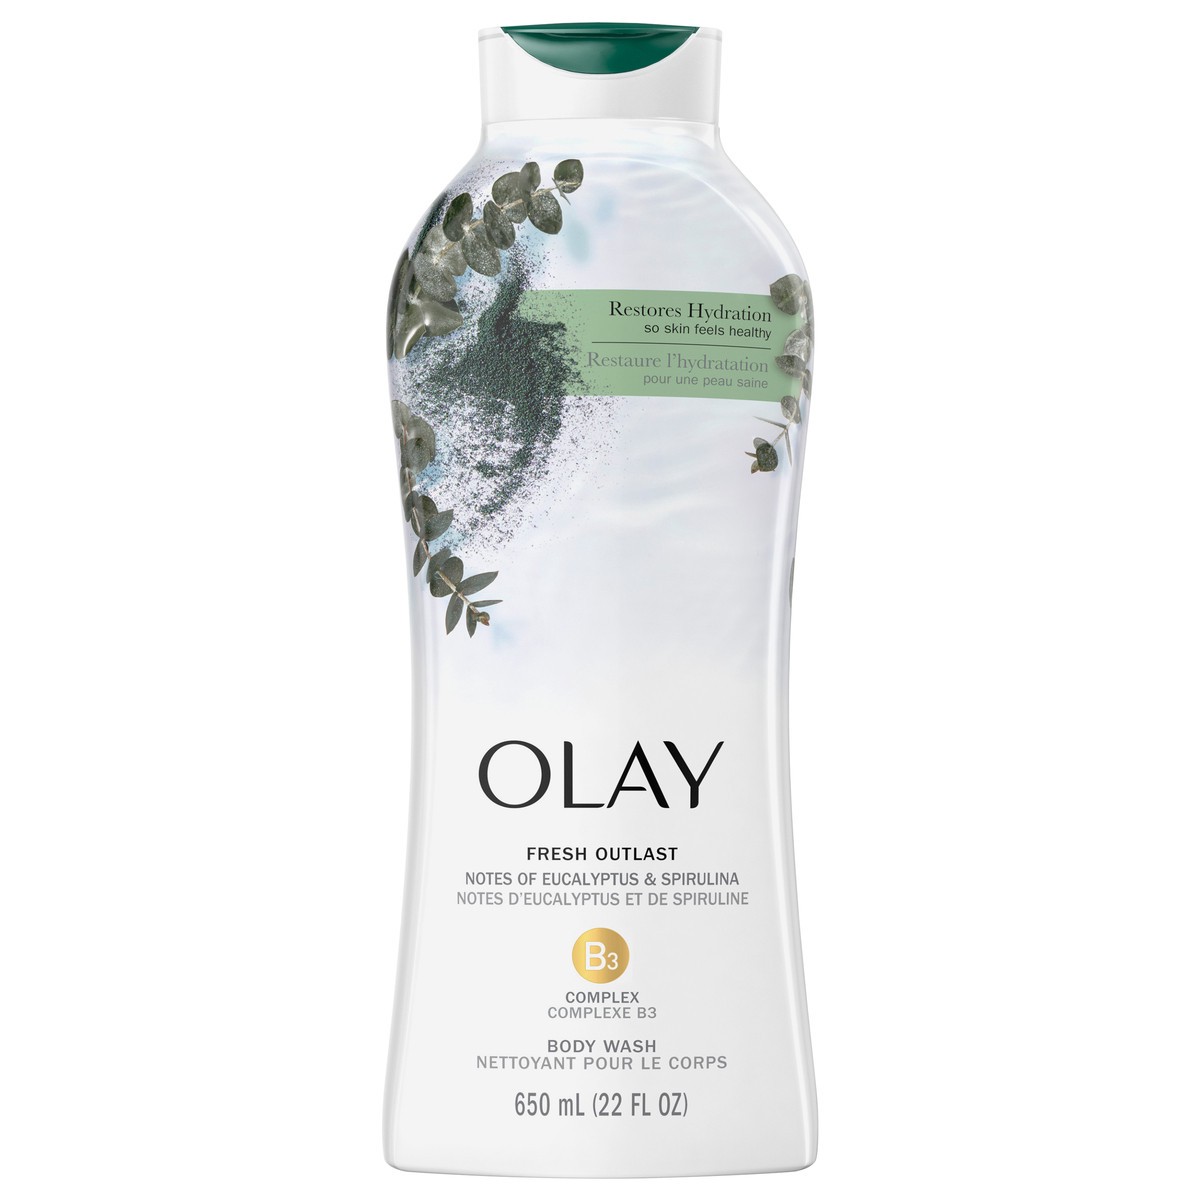 slide 1 of 3, Olay Fresh Outlast Paraben Free Body Wash with Relaxing Notes of Eucalyptus and Spirulina, 22 fl oz, 22 fl oz